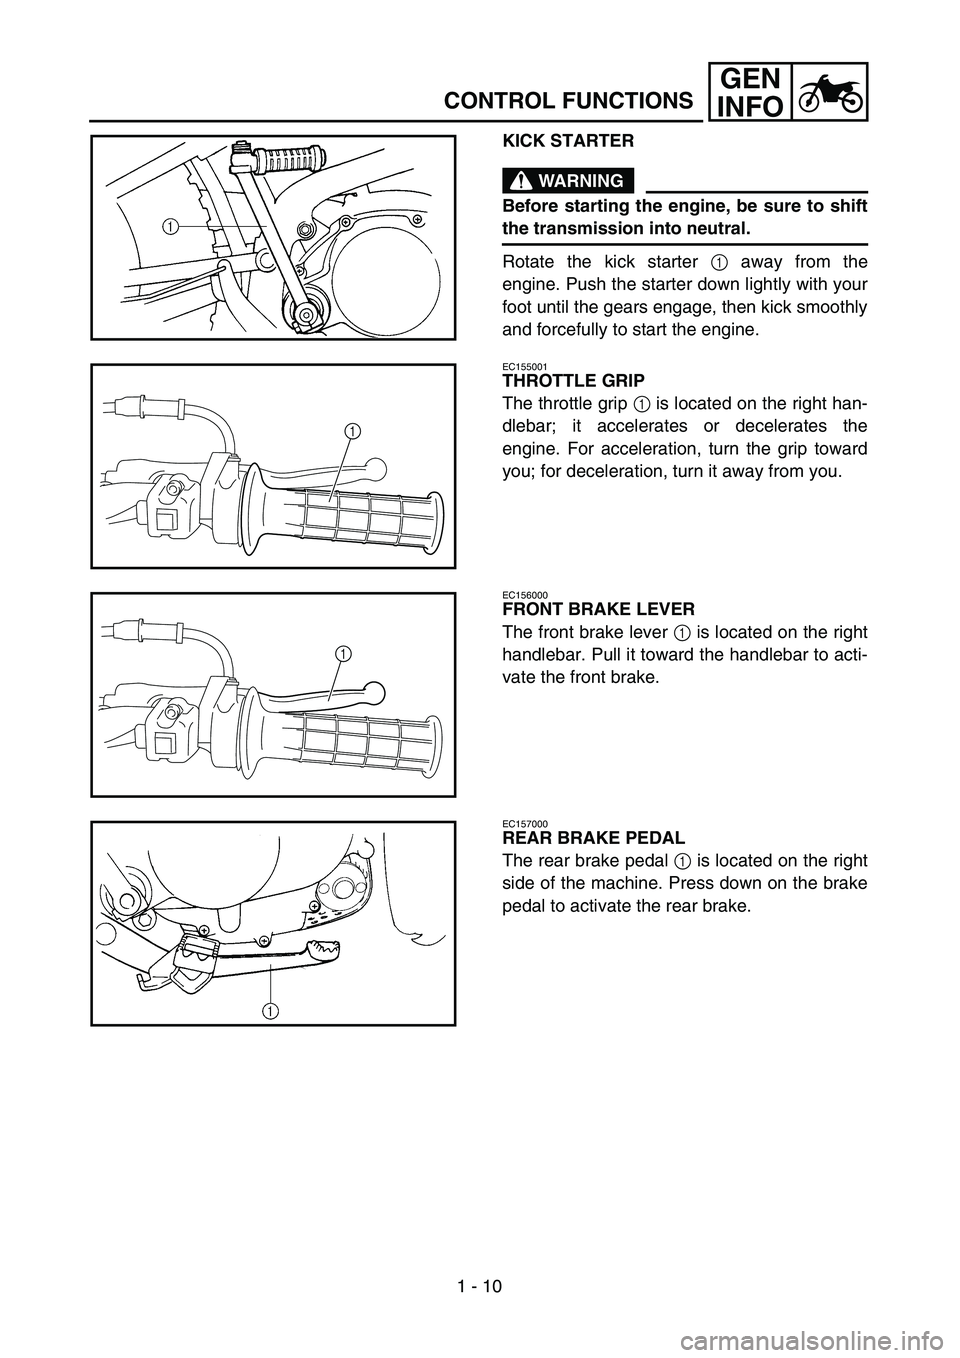 YAMAHA TTR90 2004  Owners Manual 1 - 10
GEN
INFO
CONTROL FUNCTIONS
KICK STARTER
WARNING
Before starting the engine, be sure to shift
the transmission into neutral.
Rotate the kick starter 1 away from the
engine. Push the starter down